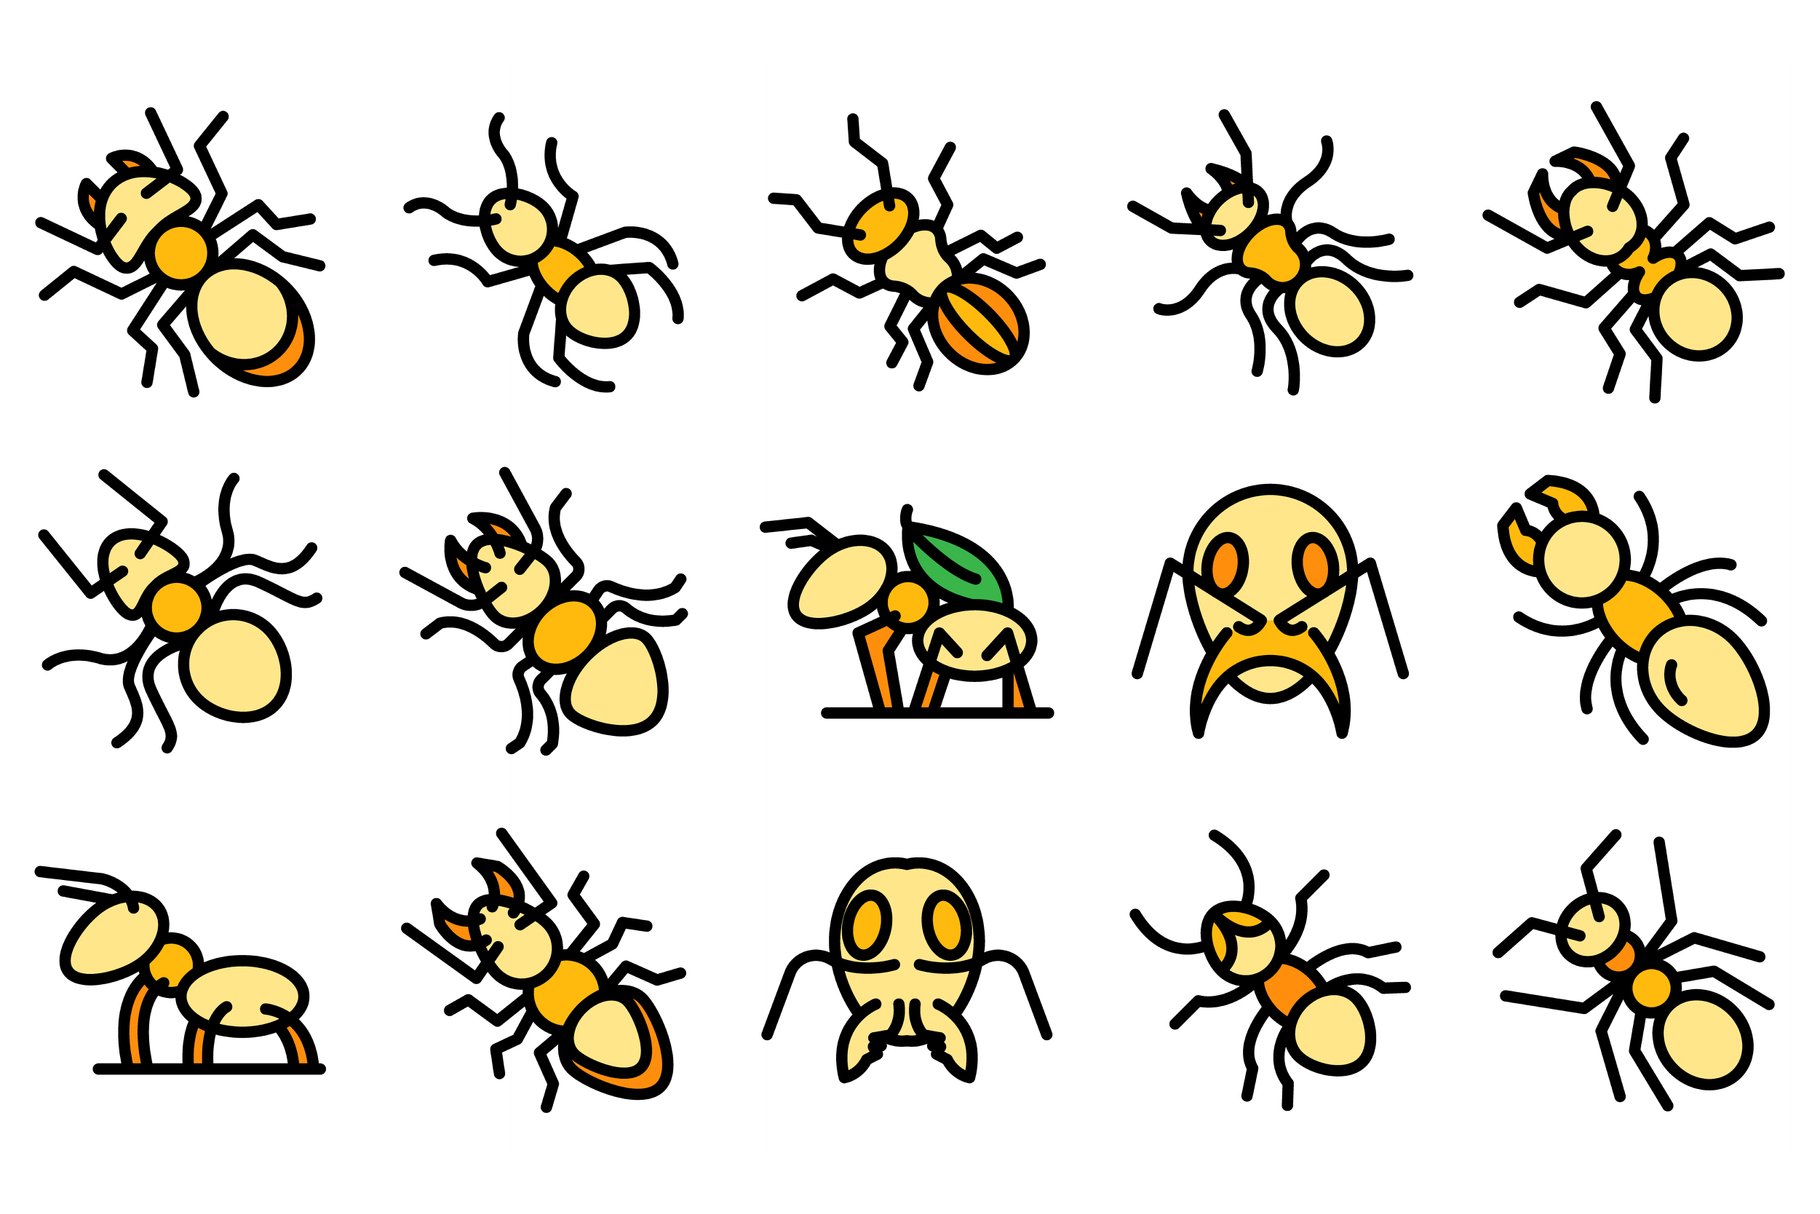 Ant icons set vector flat cover image.